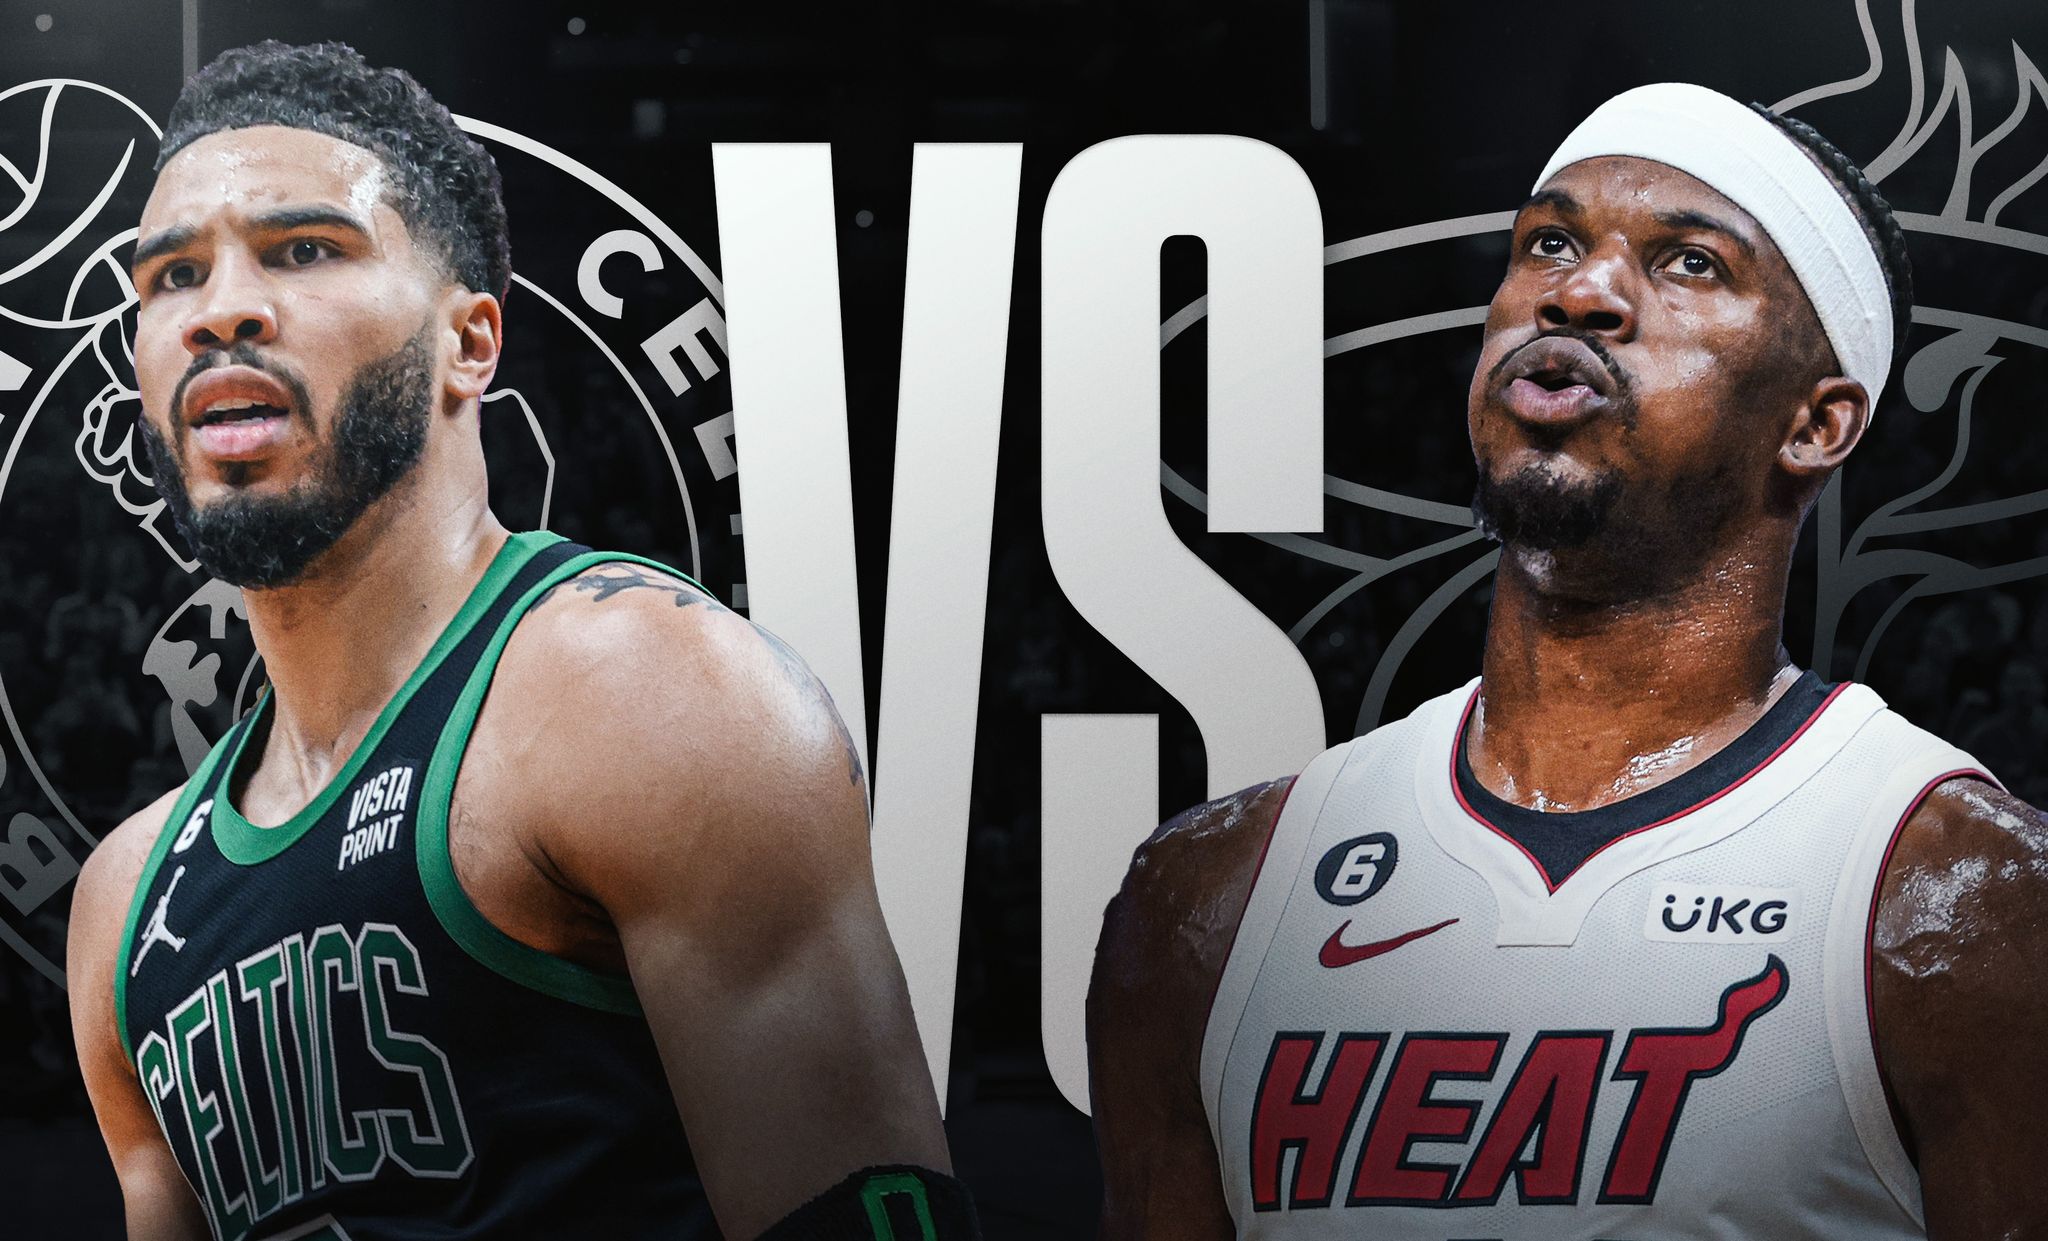 Can The Heat Make The Finals? Heat vs. Celtics Game 4 Playoffs Preview, Odds & Predictions